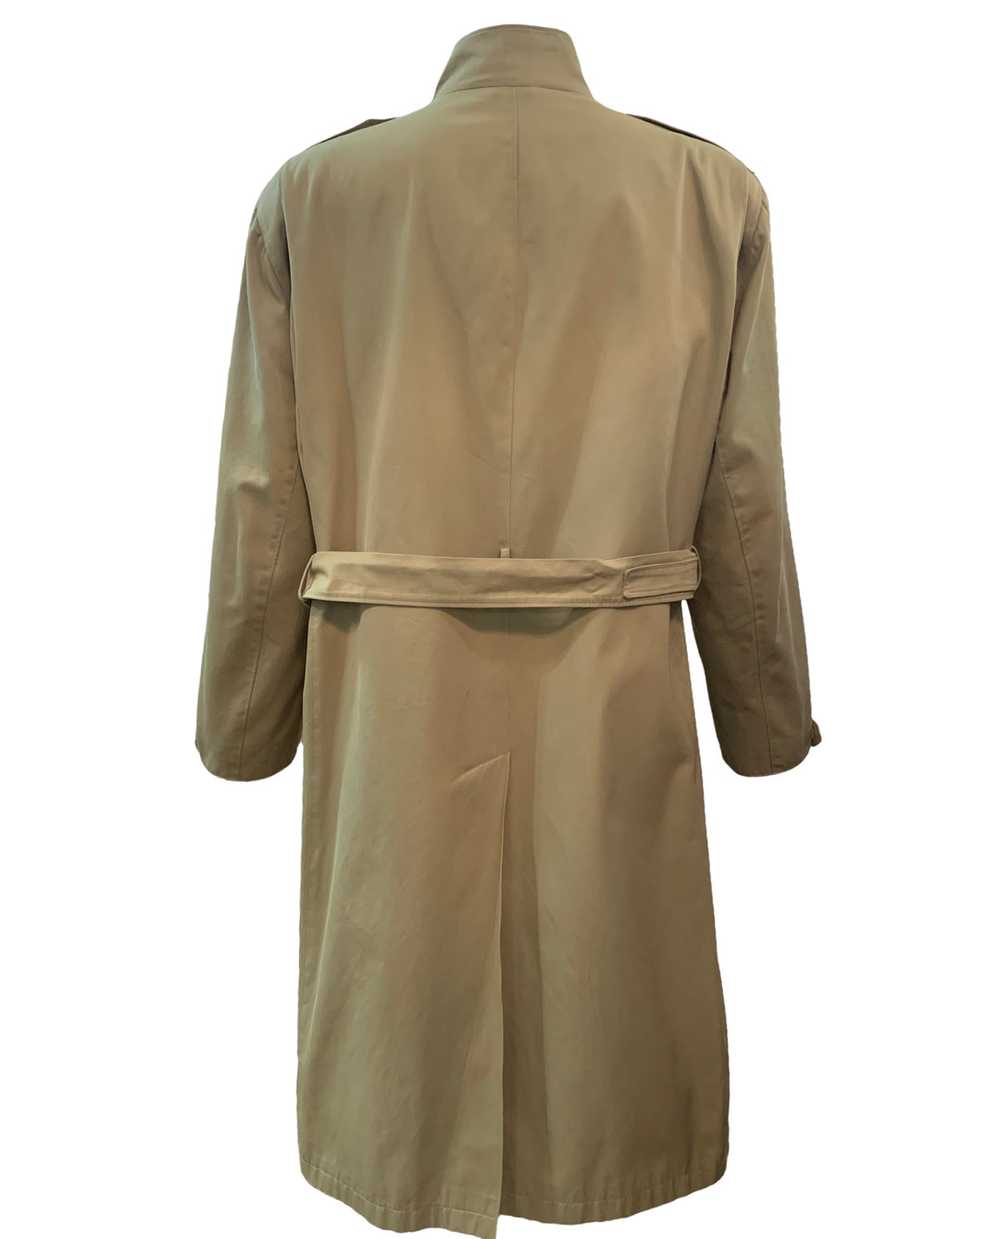 Gucci 80s Belted Trench Coat With Logo Buttons - image 3